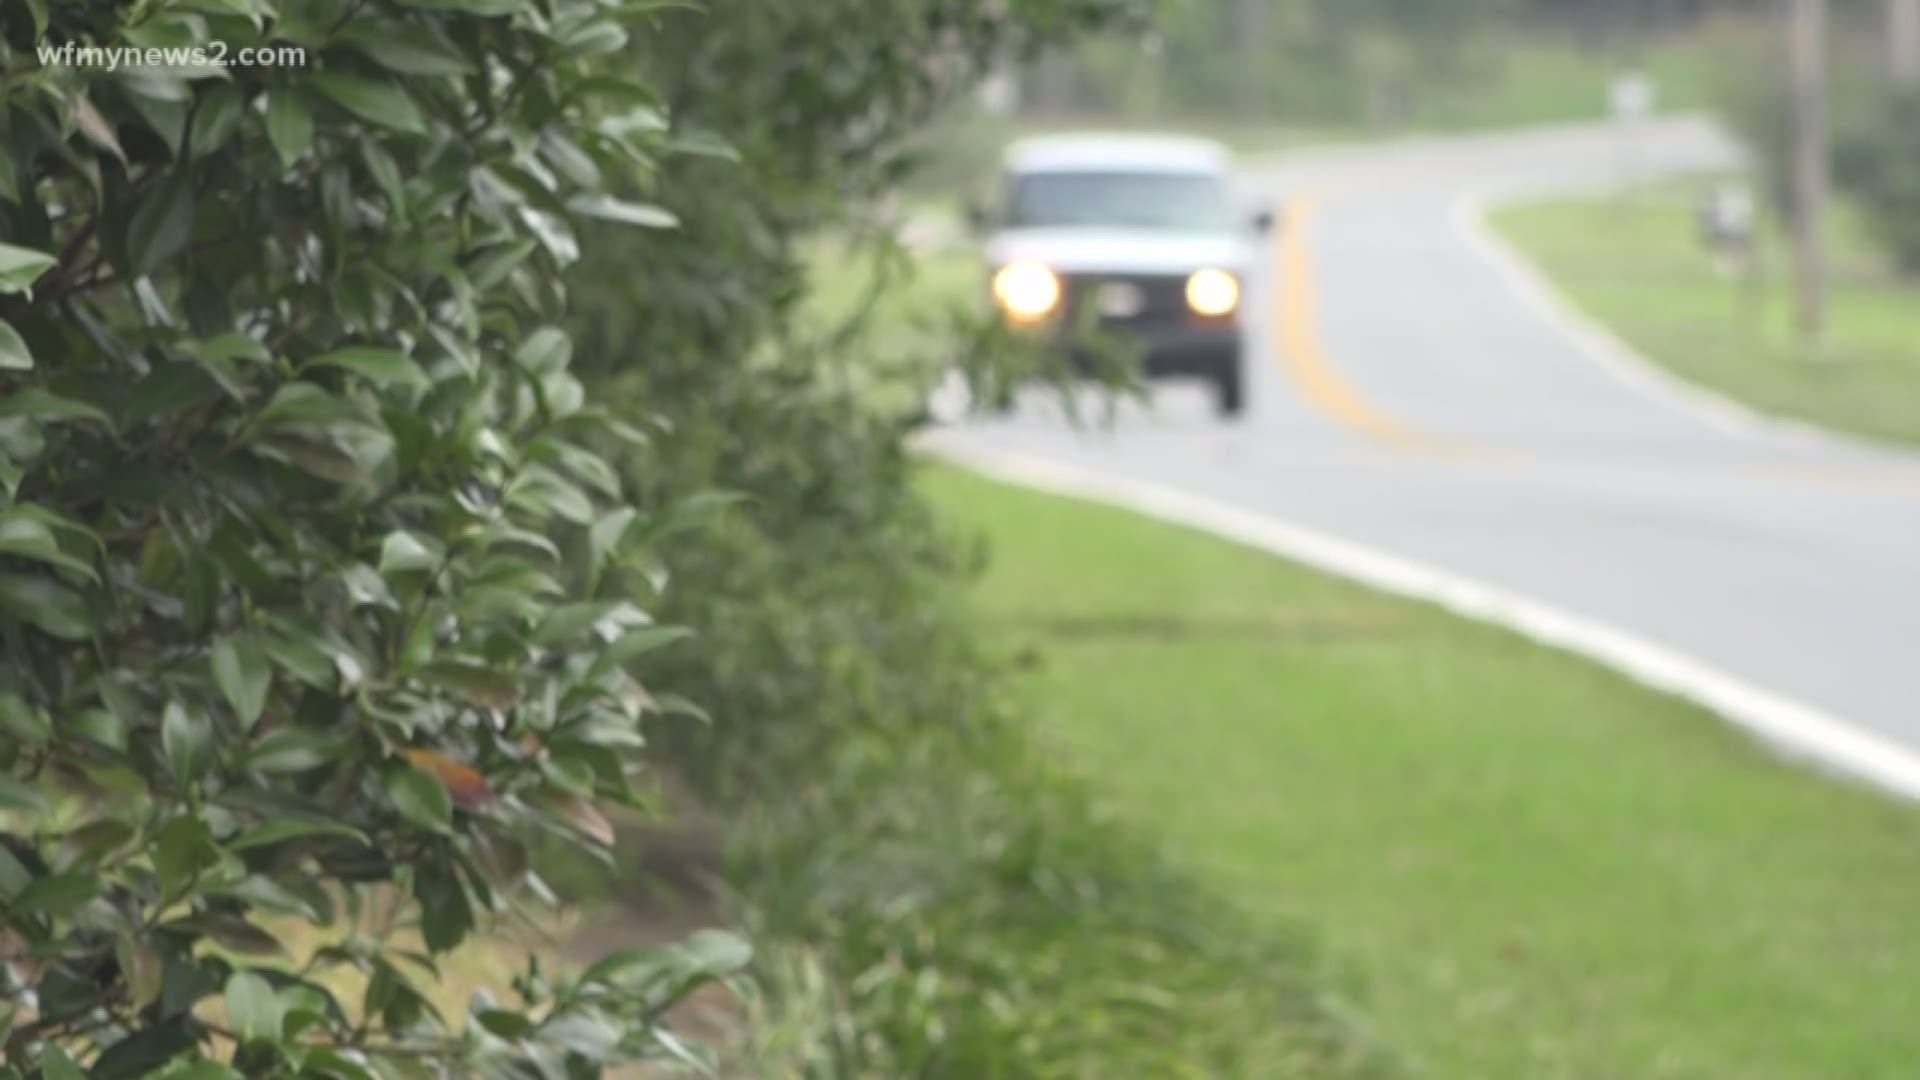 A Davidson county mom says two men tried to lure her 7-year-old son into a car while he was playing in their front yard.